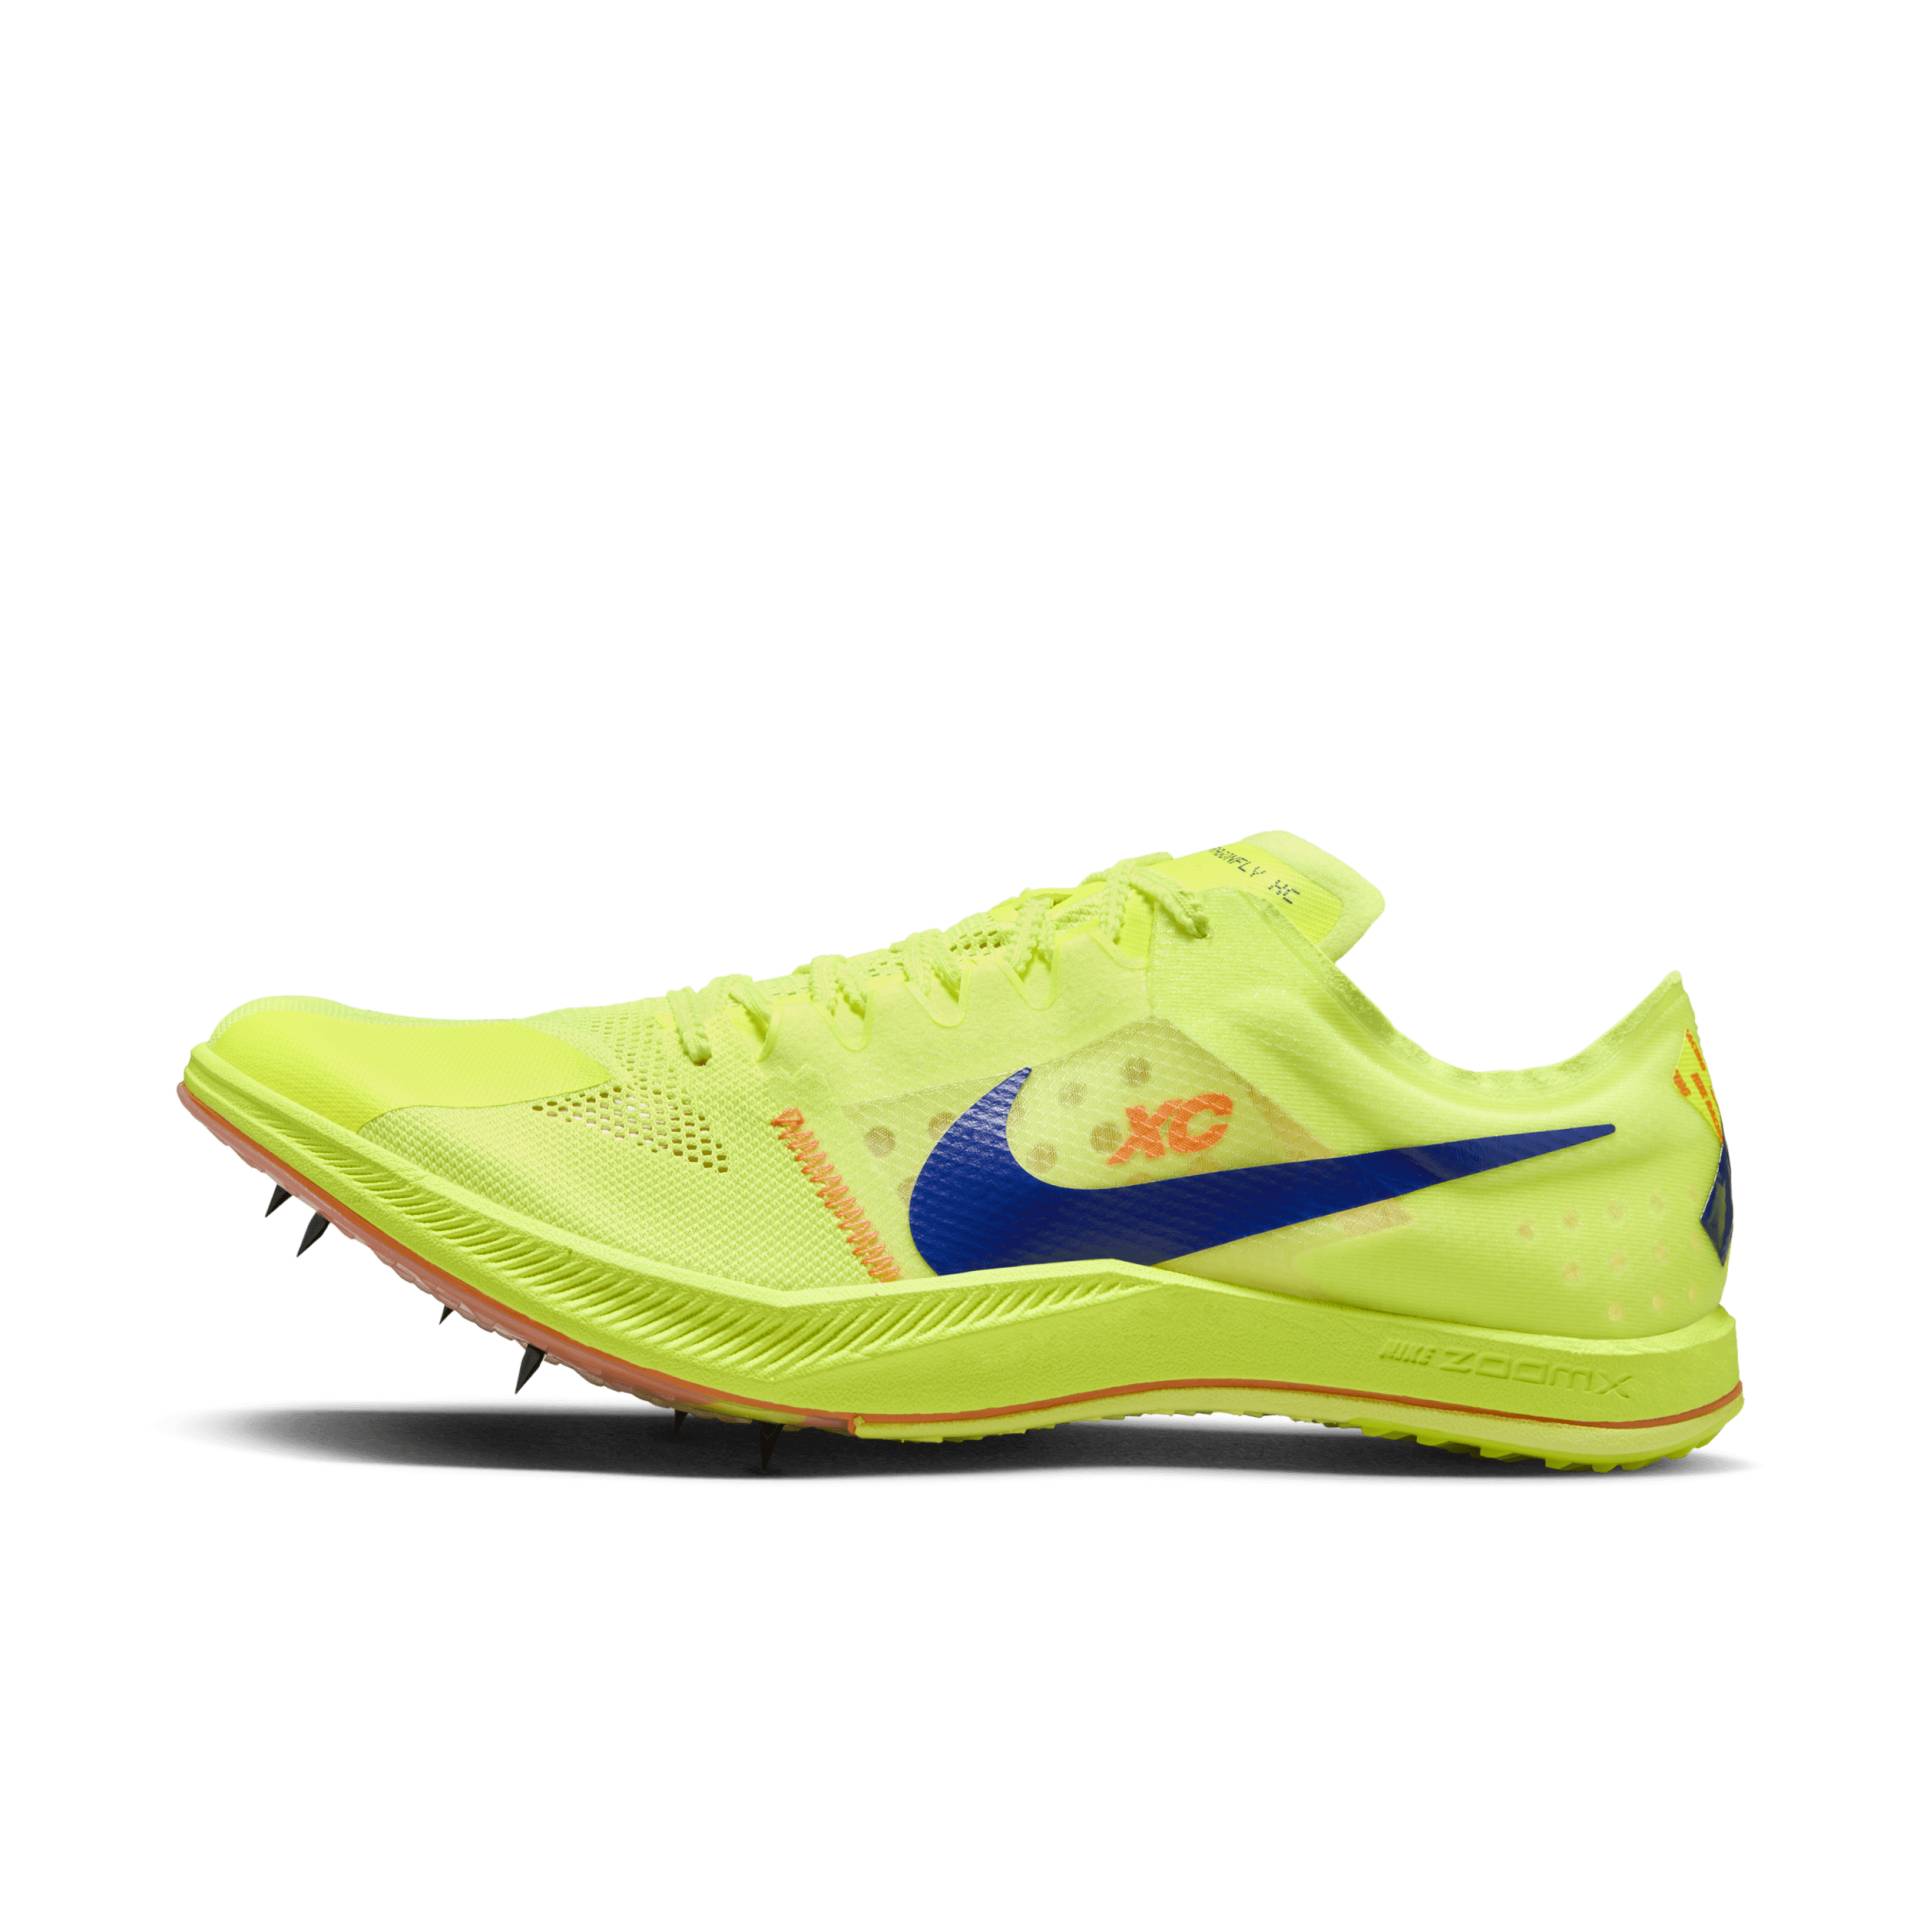 Nike ZoomX Dragonfly XC Cross-Country-Spikes - Gelb von Nike